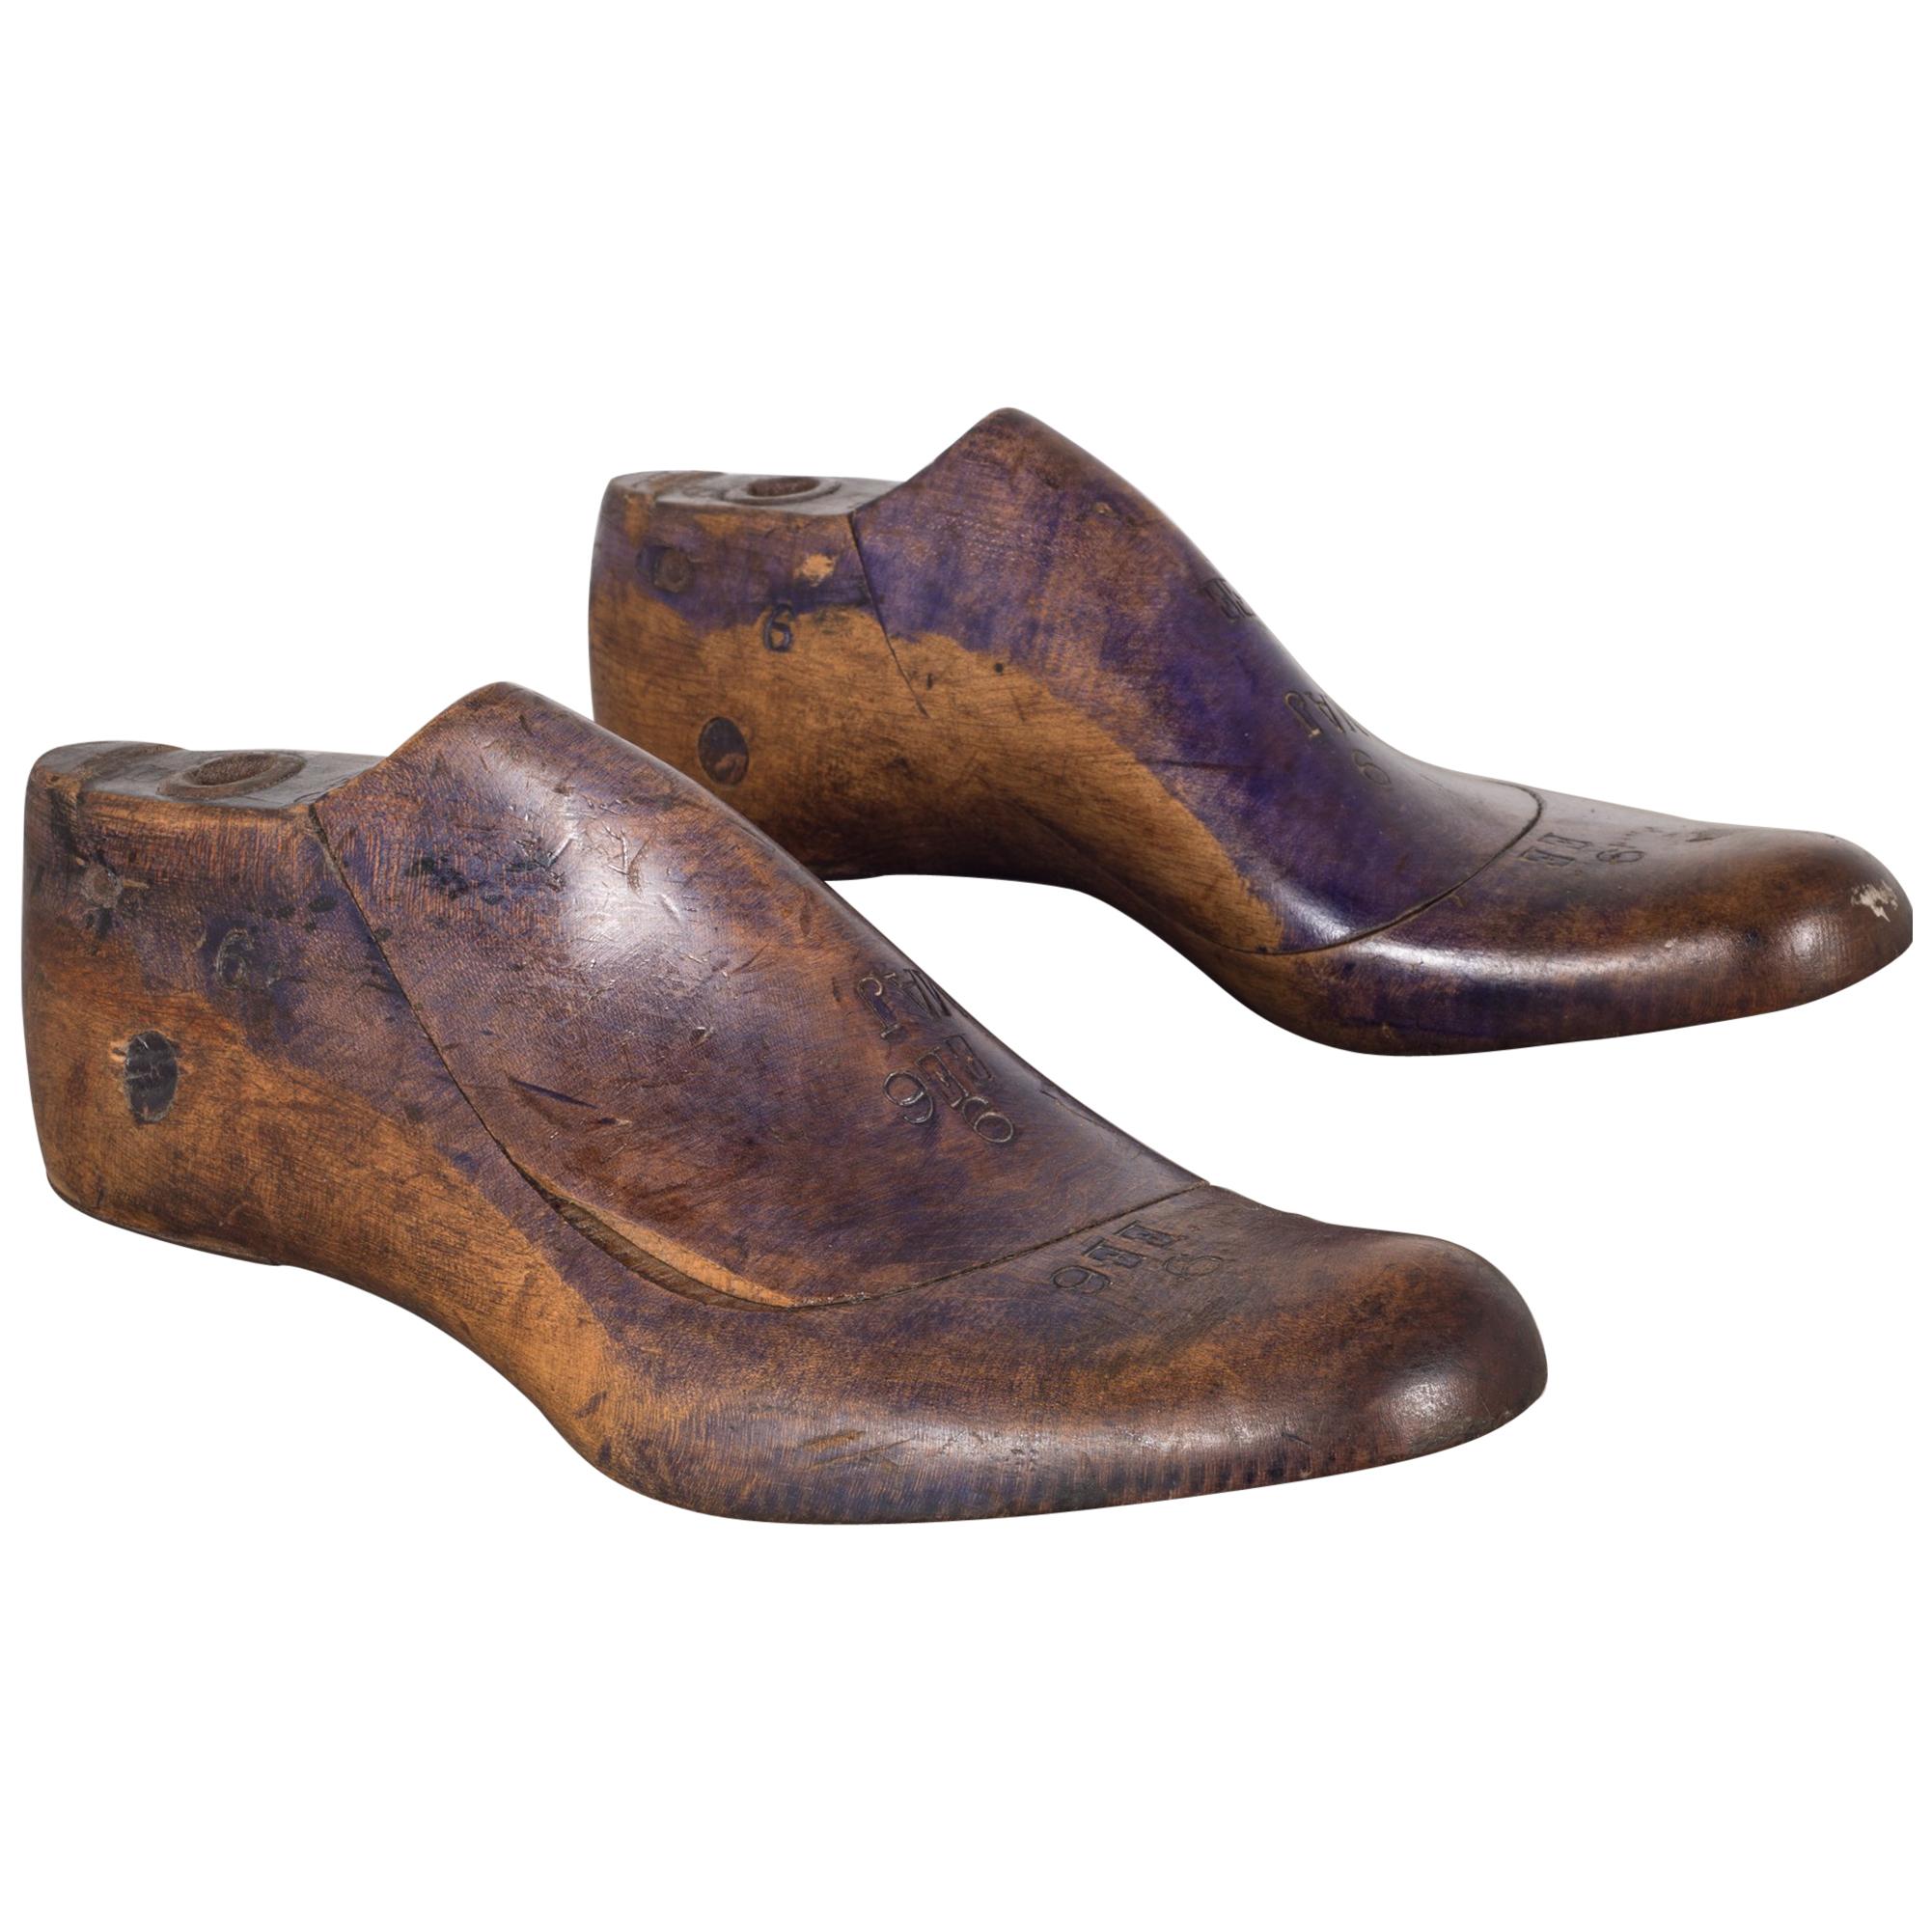 Early 20th Century Antique Wooden Shoe Last, circa 1920